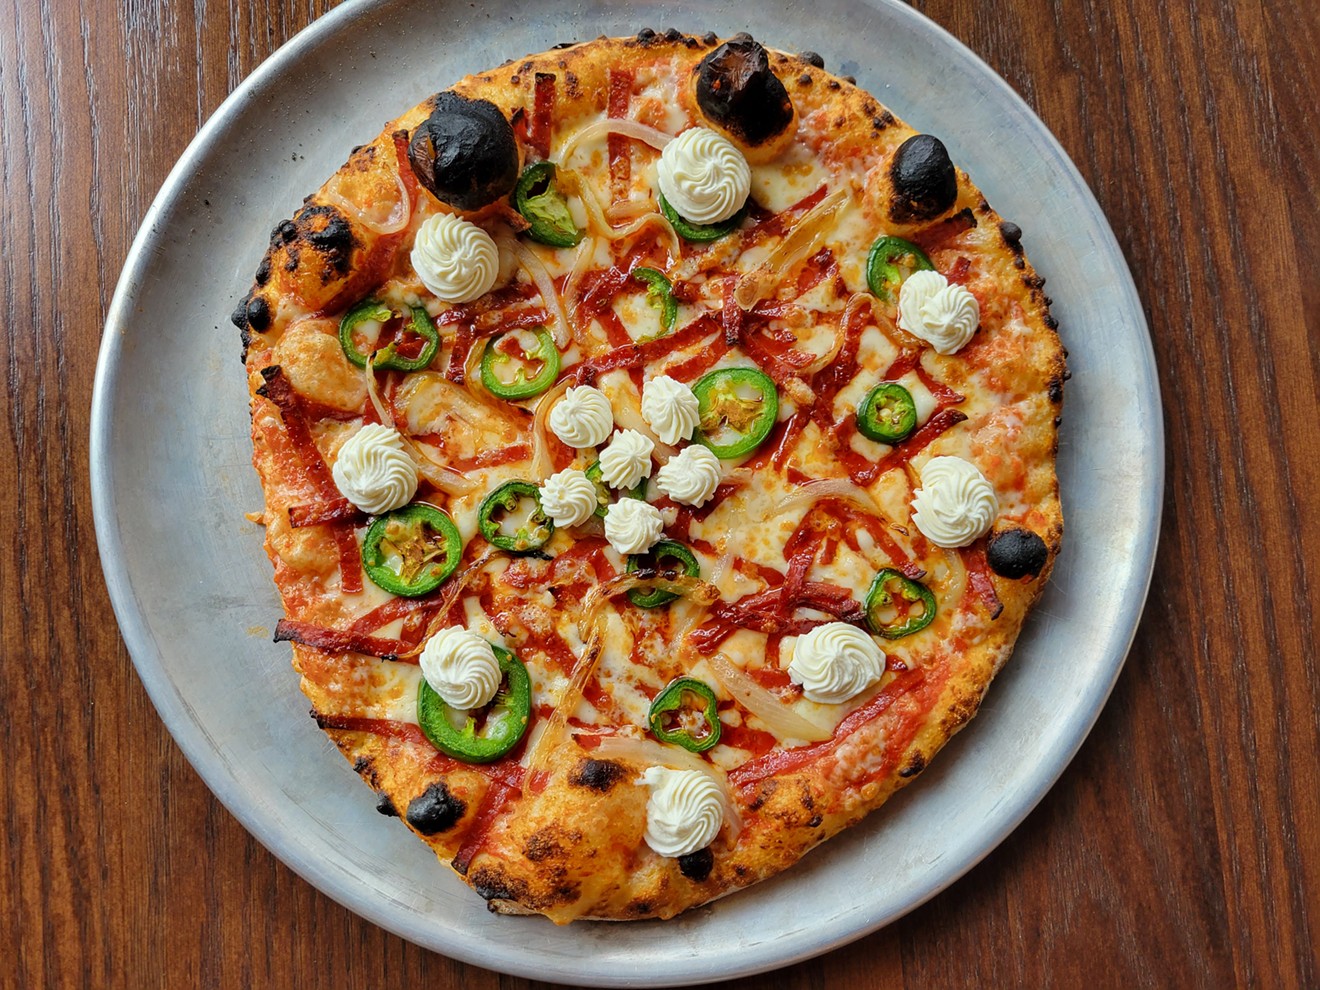 Quinto has created its own style of pizza.